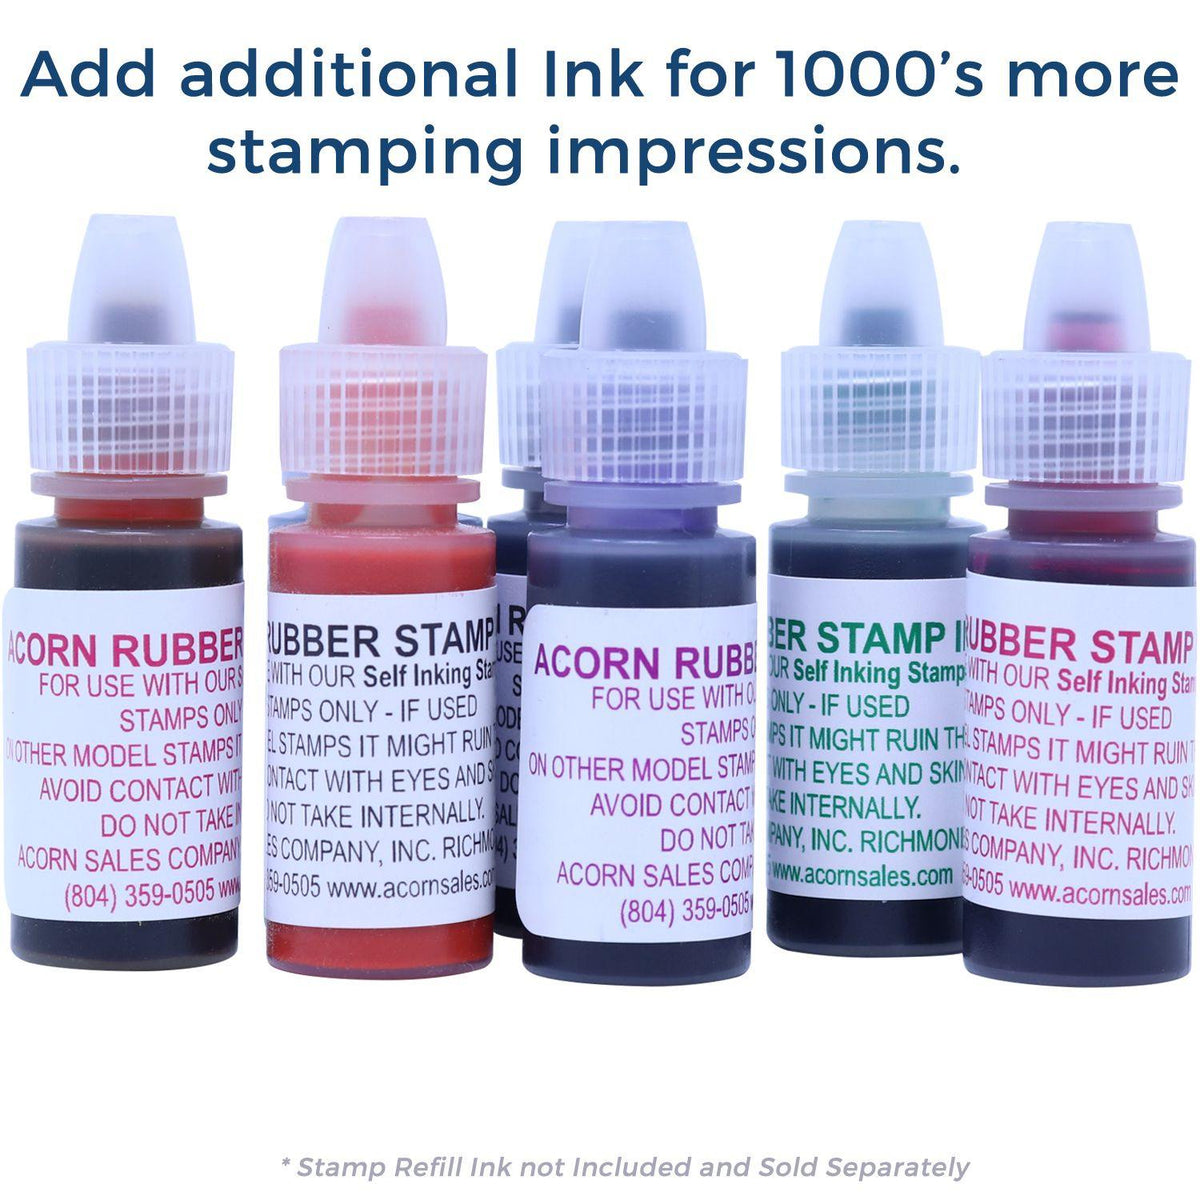 Slim Pre-Inked Bold Paid Stamp - Engineer Seal Stamps - Brand_Slim, Impression Size_Small, Stamp Type_Pre-Inked Stamp, Type of Use_Accounting, Type of Use_Finance, Type of Use_Office